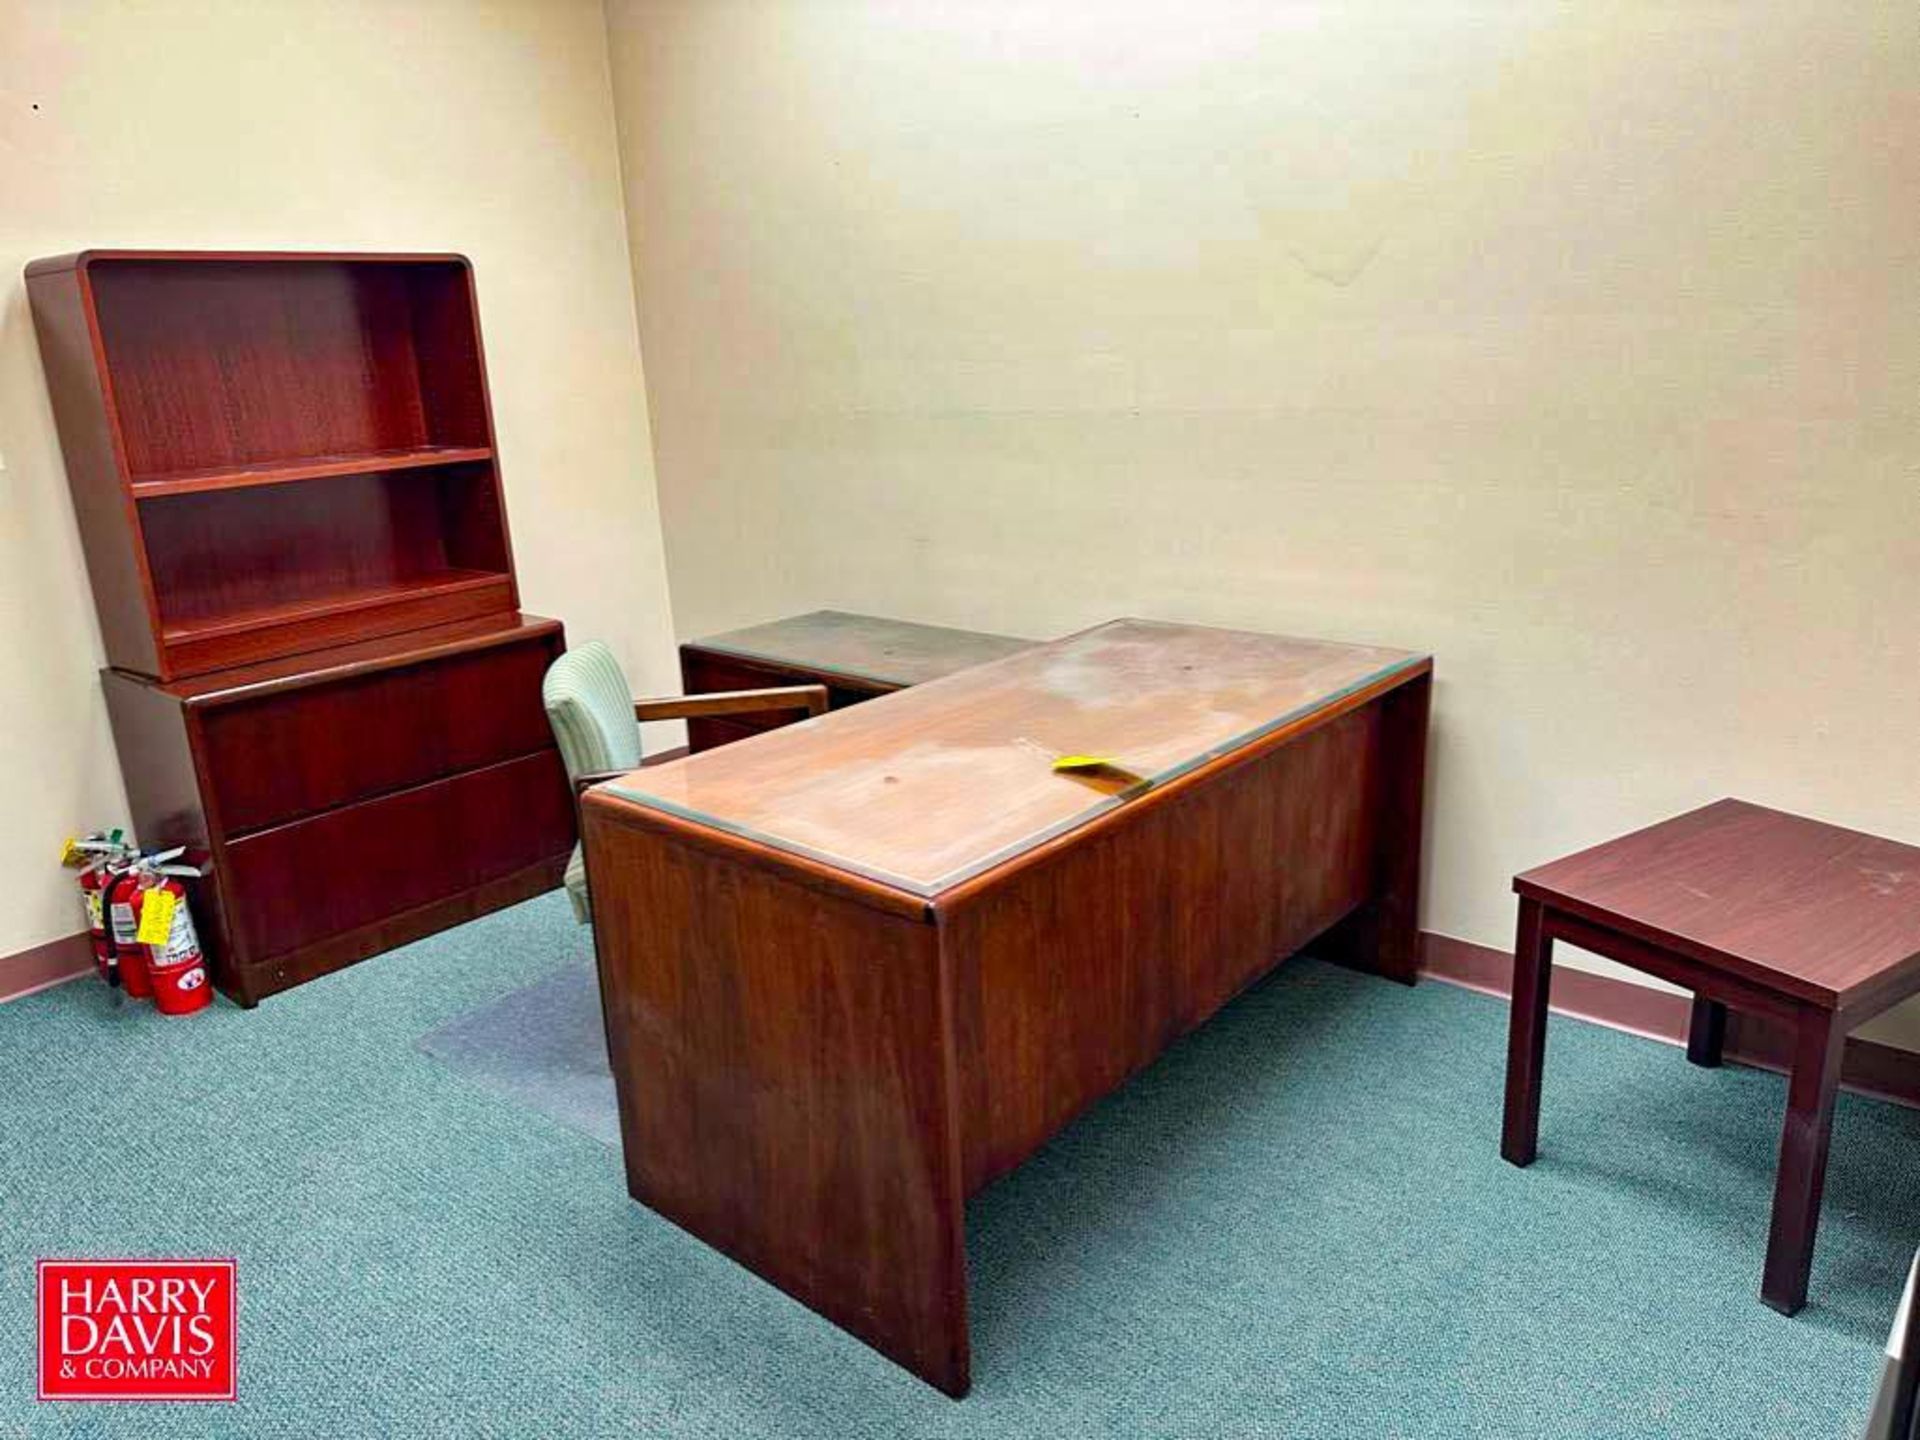 L-Shaped Desk, Bookcase, Lateral File Cabinet, 4-Drawer File Cabinet and Chair - Rigging Fee: $400 - Image 2 of 2